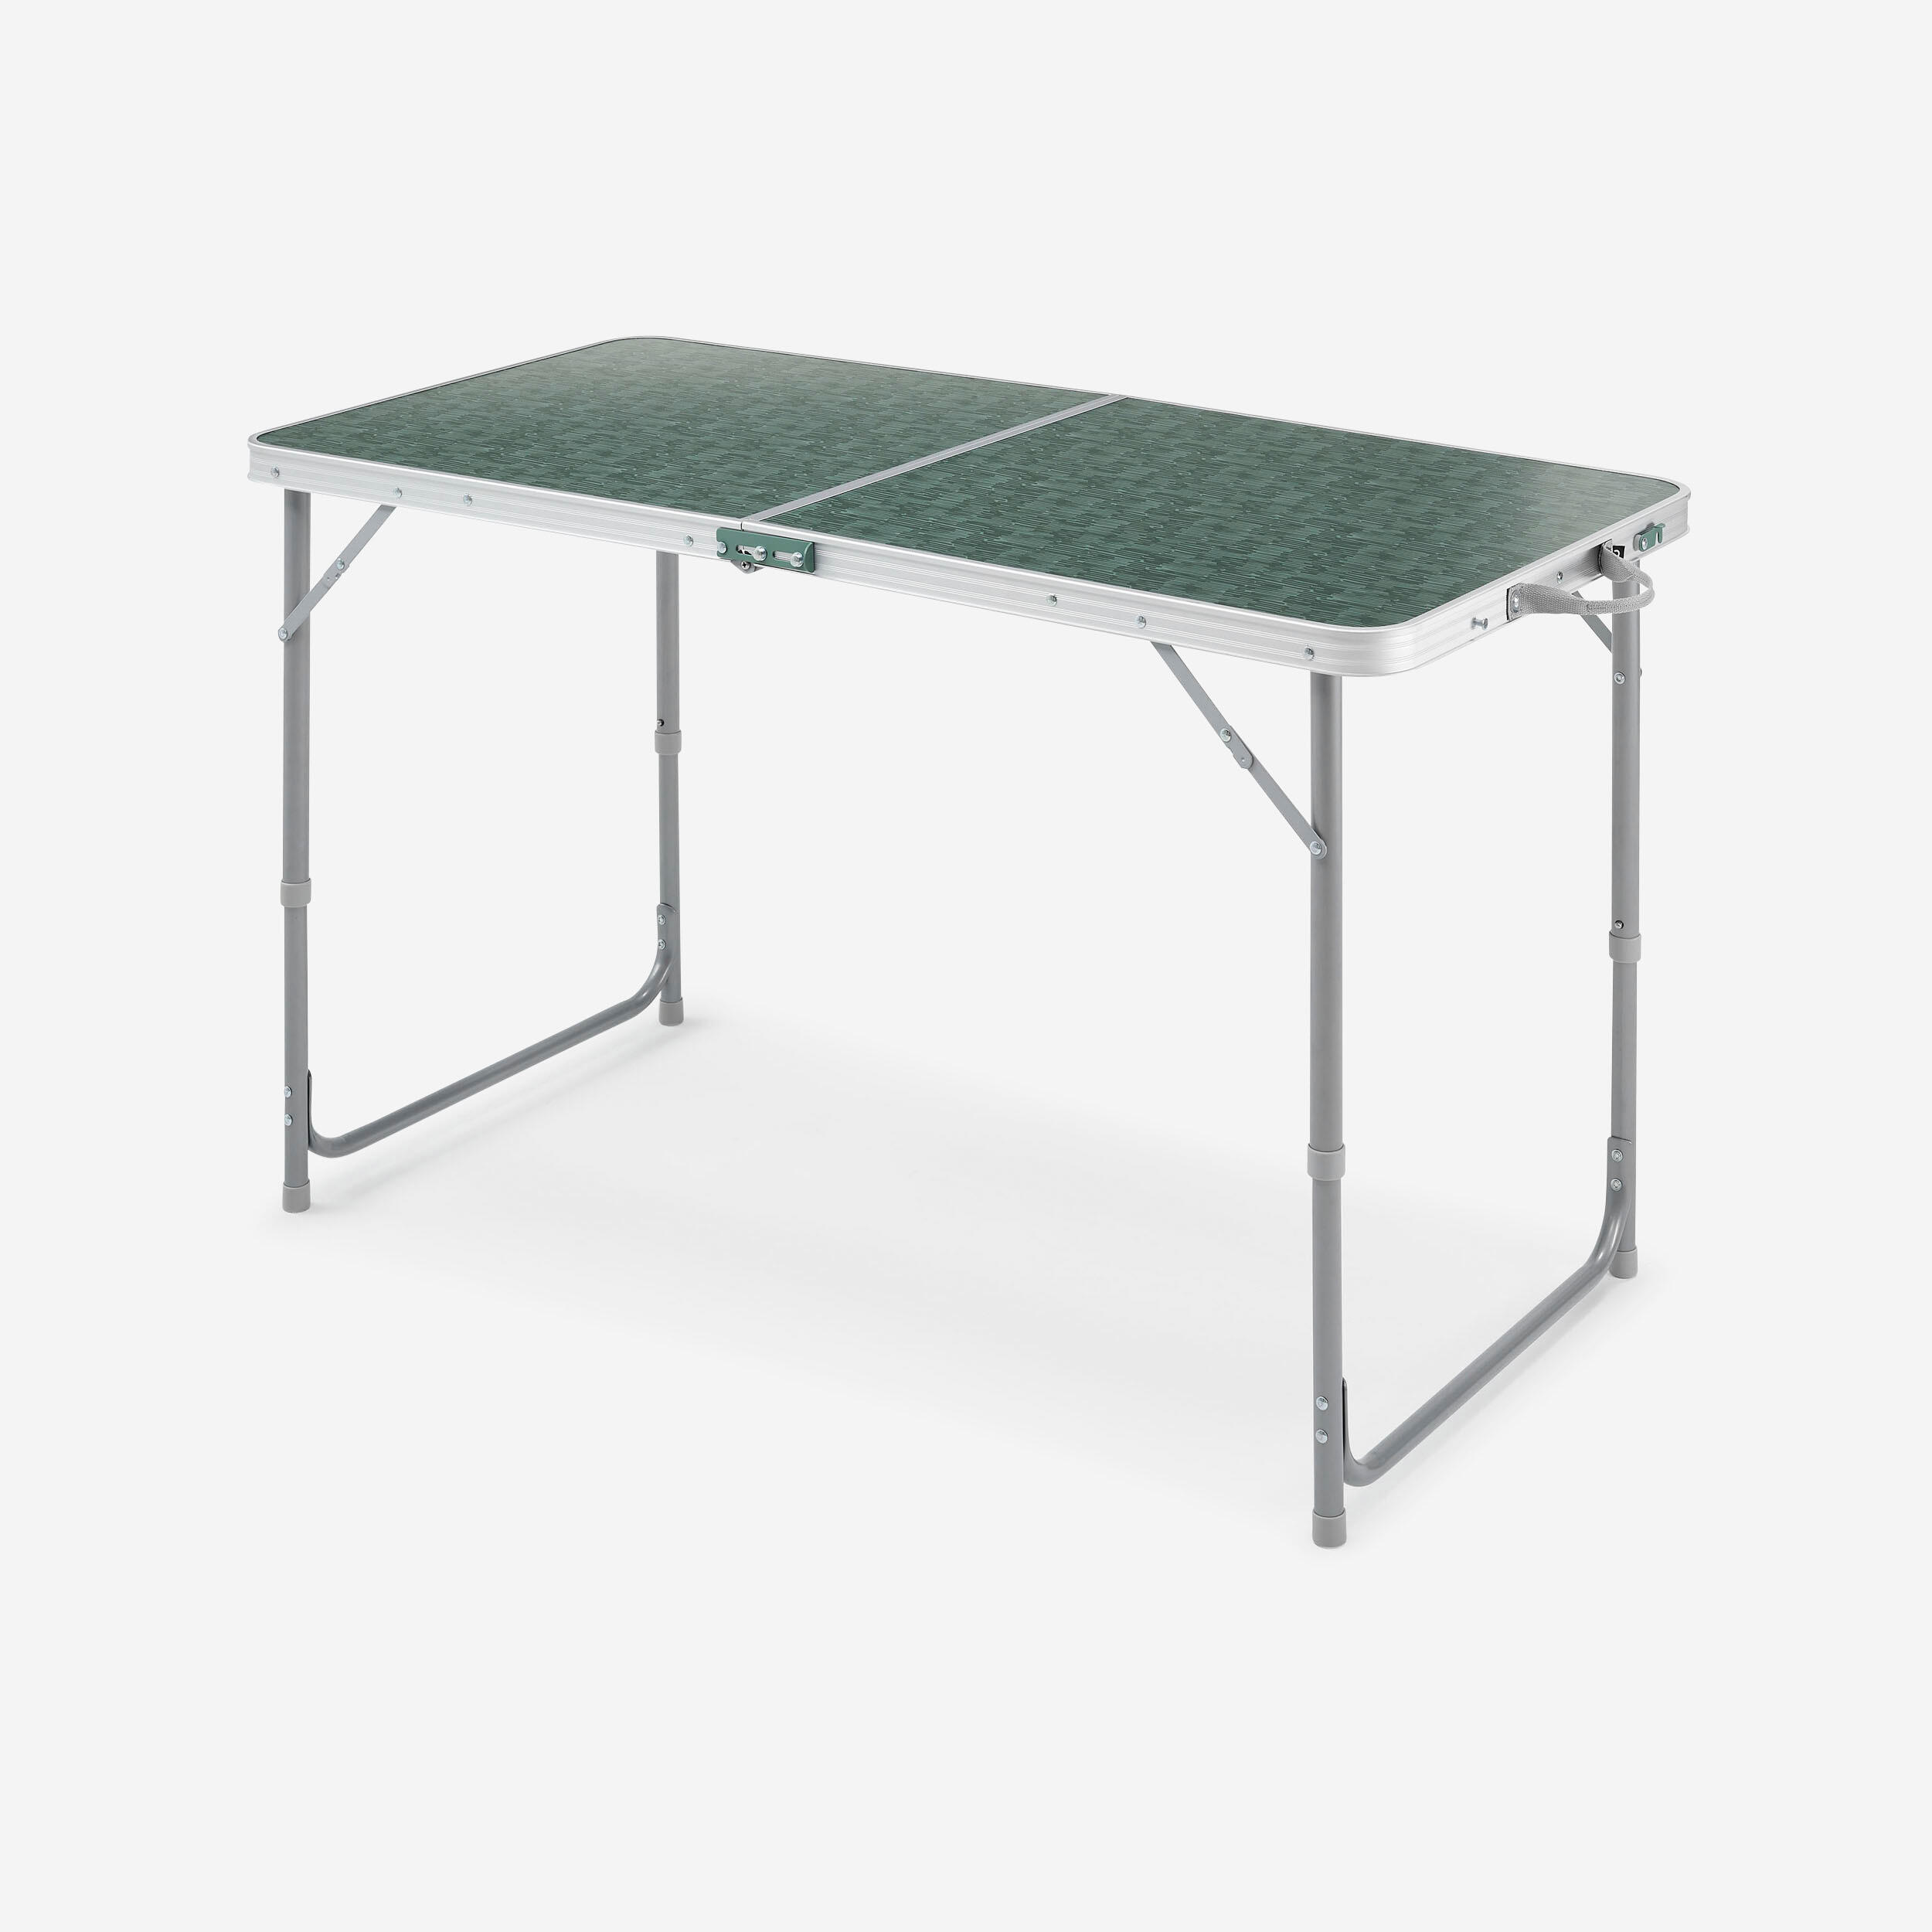 QUECHUA FOLDING CAMPING TABLE - 4 TO 6 PEOPLE